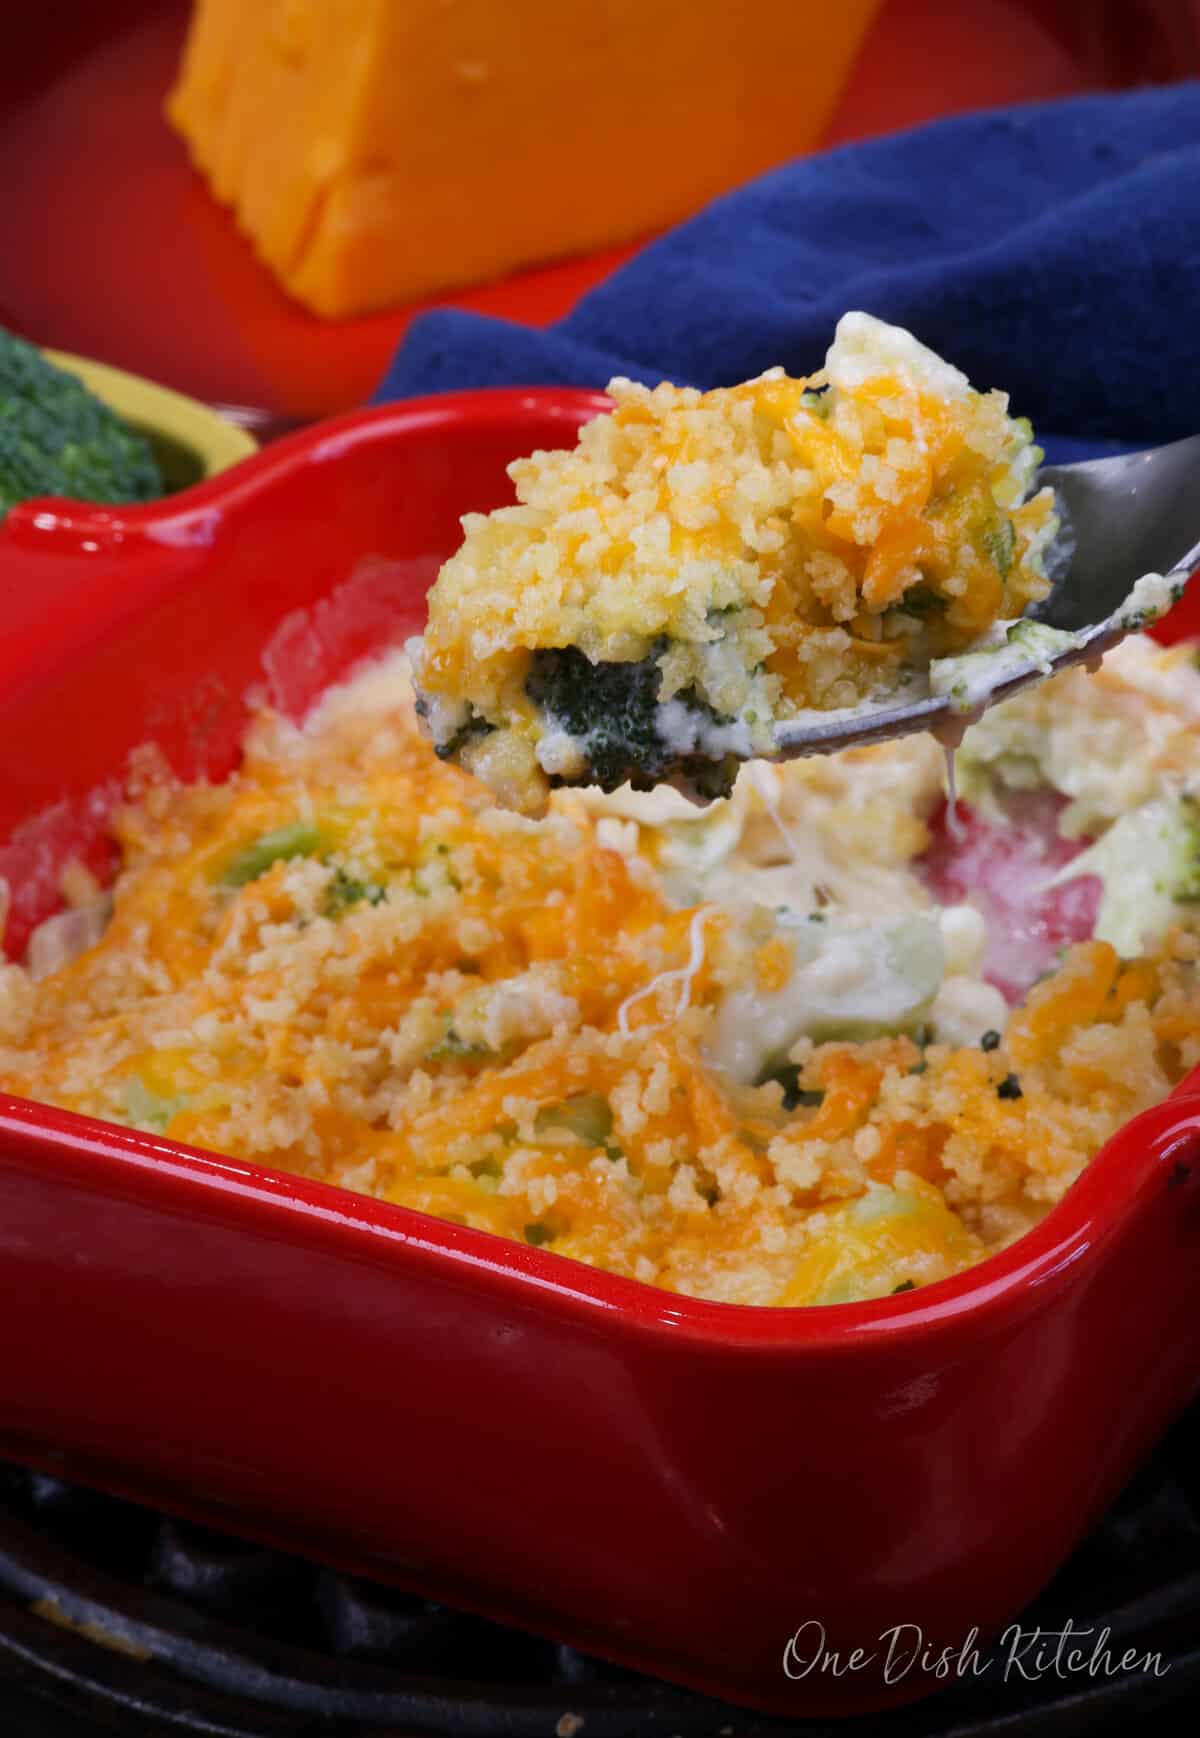 broccoli casserole topped with melted cheddar cheese in a red baking dish with a fork on the side.